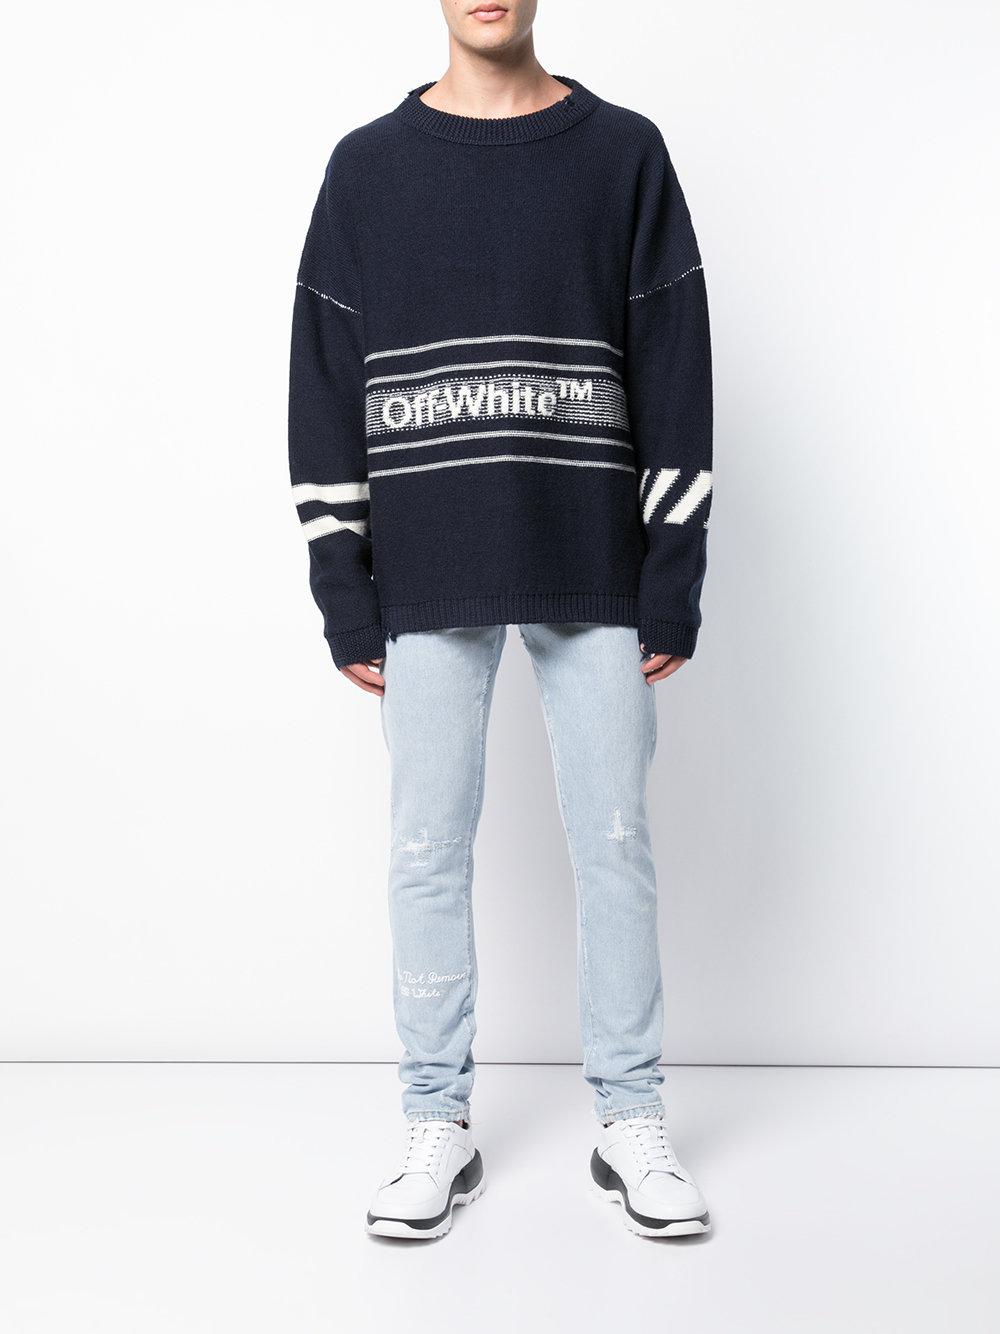 Off-White c/o Virgil Abloh Wool Intarsia-knit Jumper in Blue for 